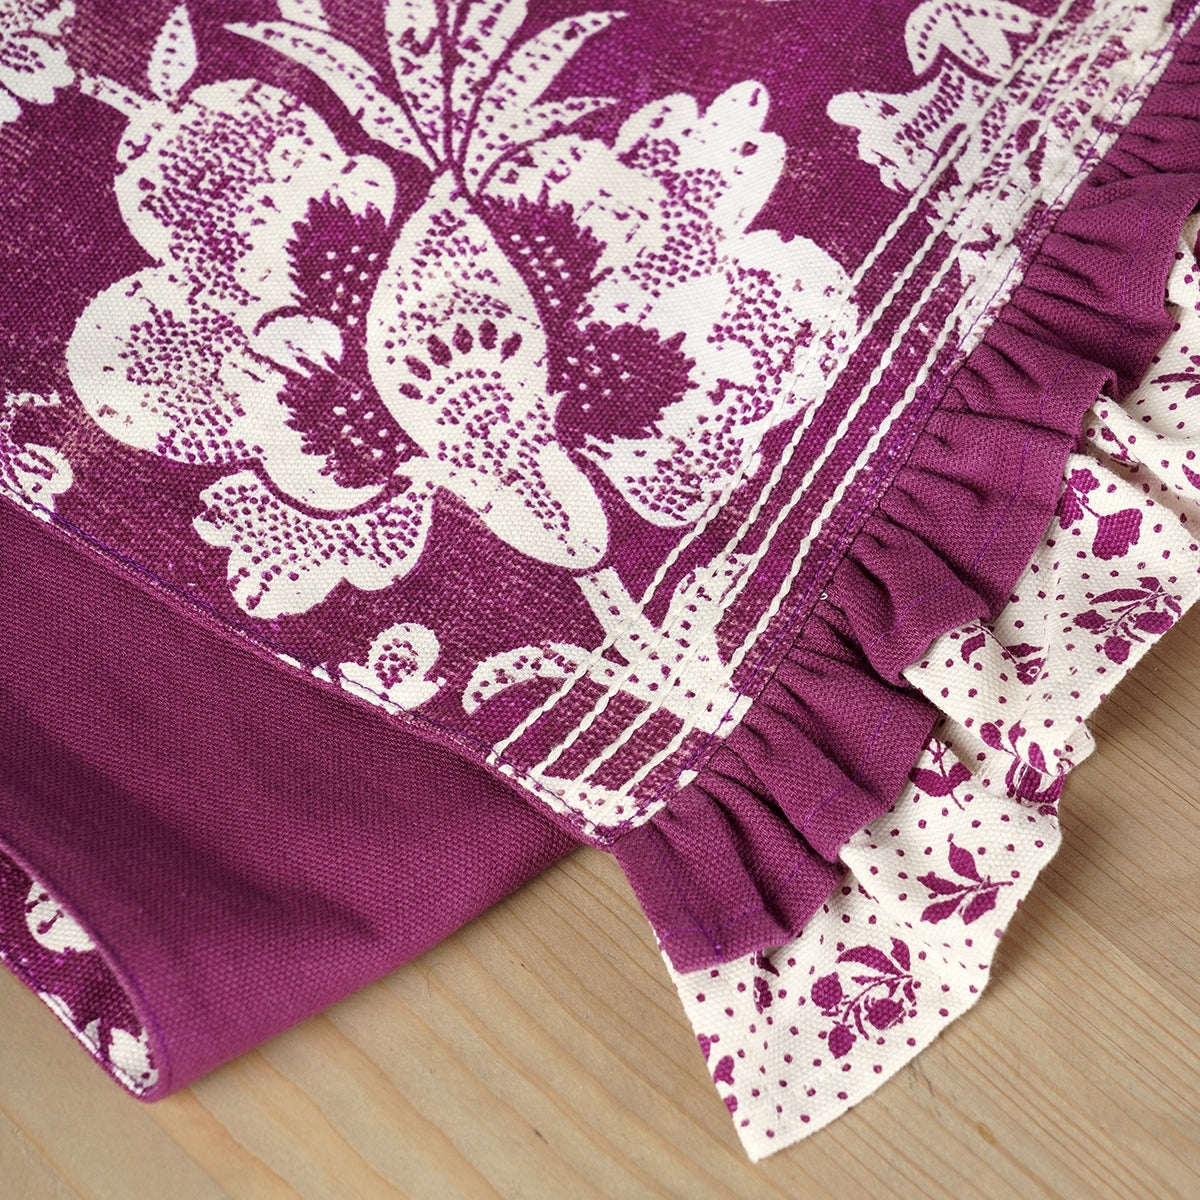 Maroon / Plum cotton table runner, bold floral block print with frill border, table decor, sizes available